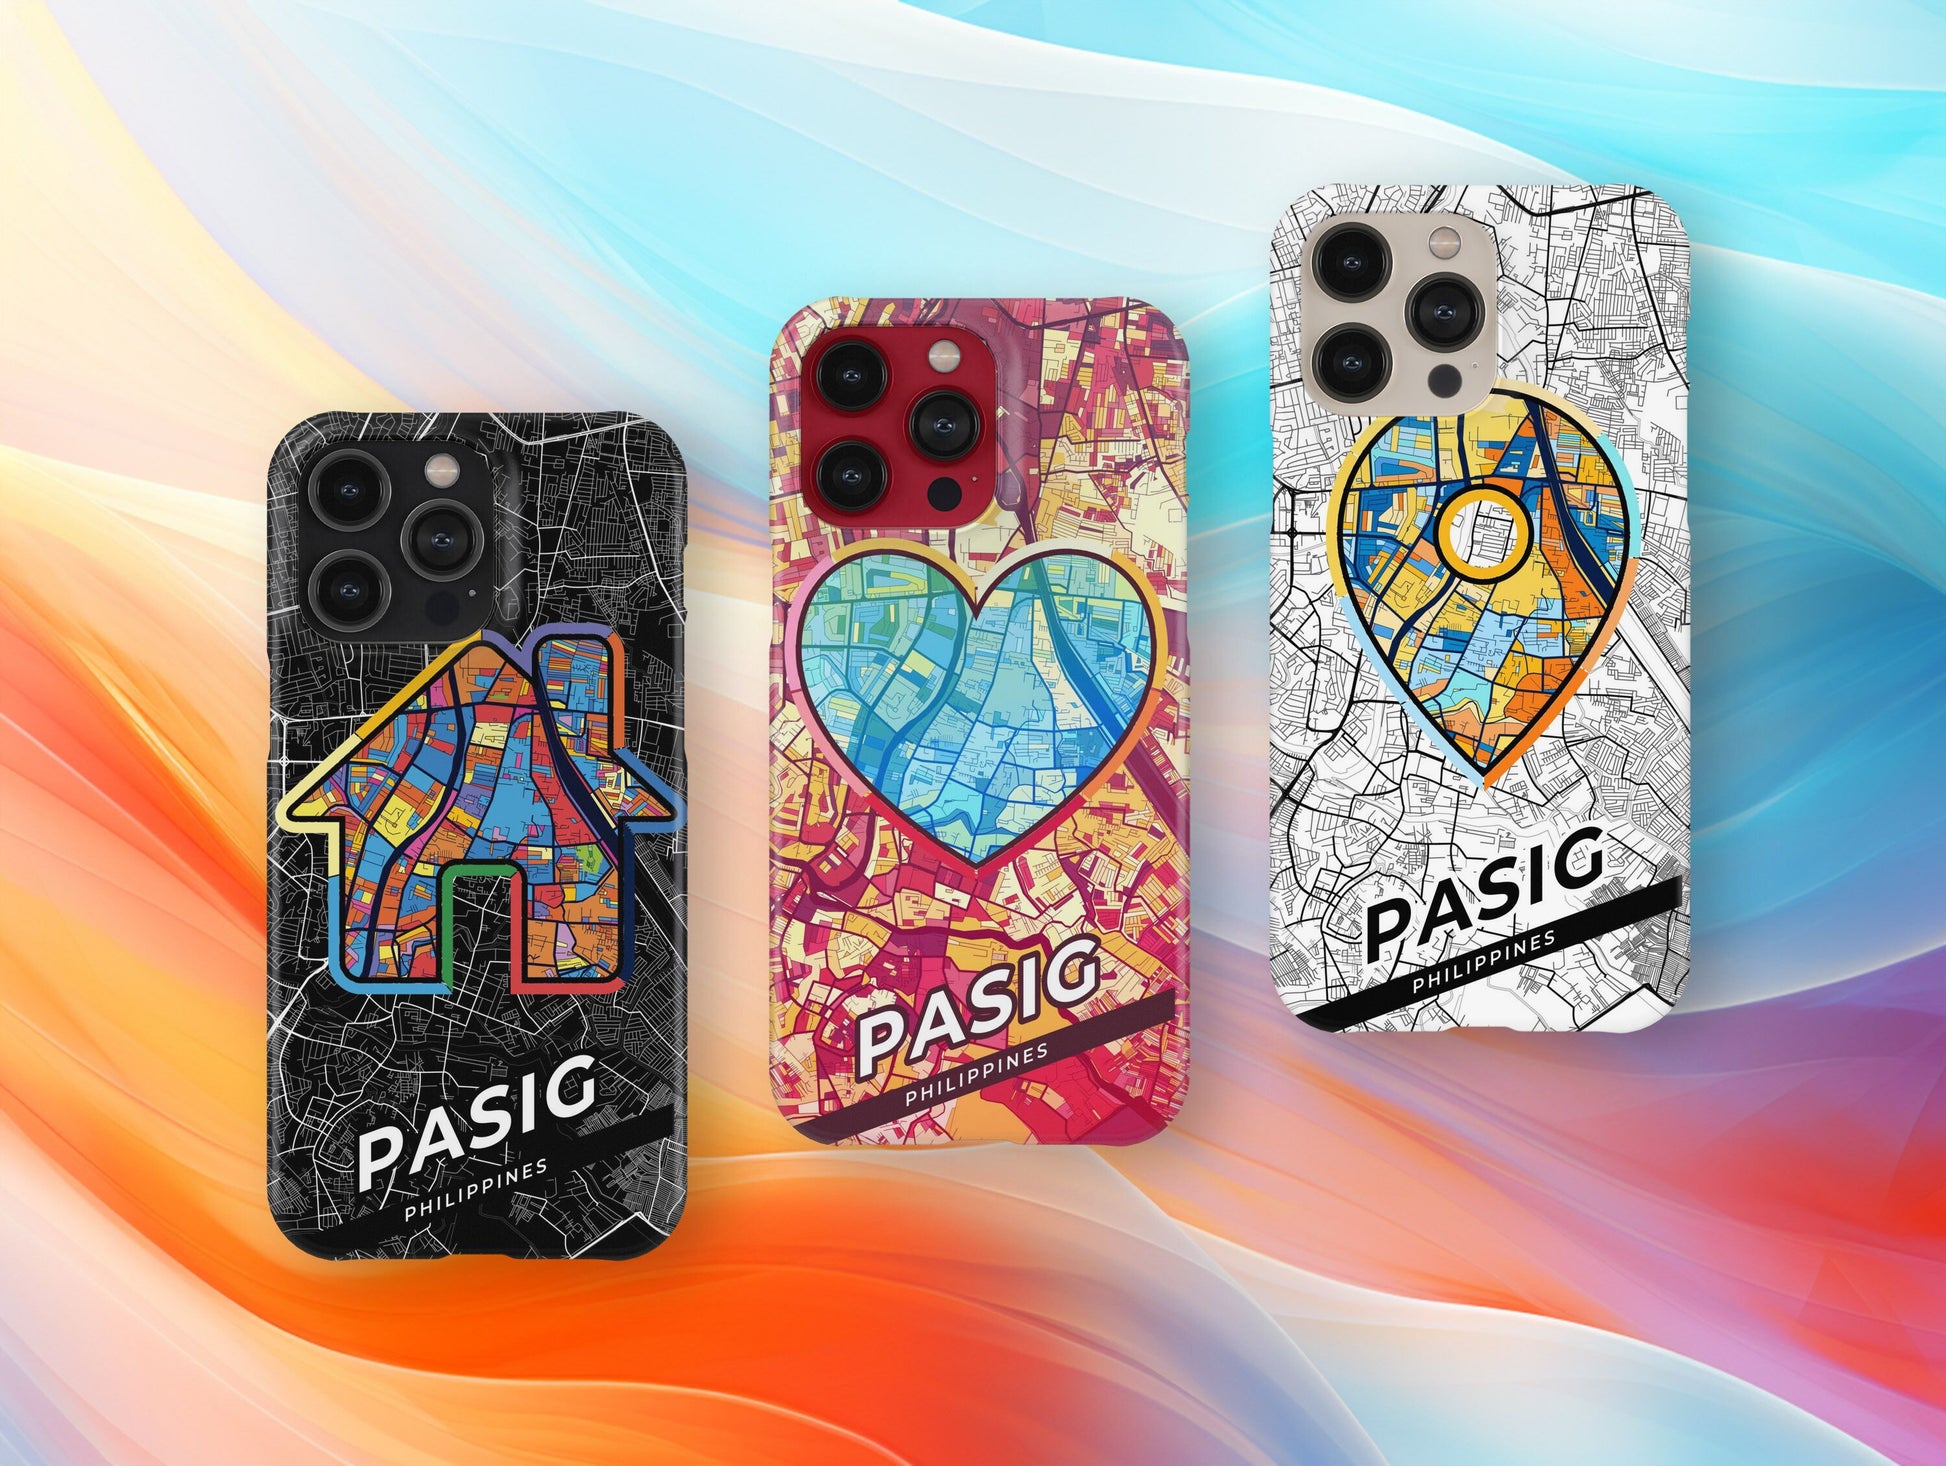 Pasig Philippines slim phone case with colorful icon